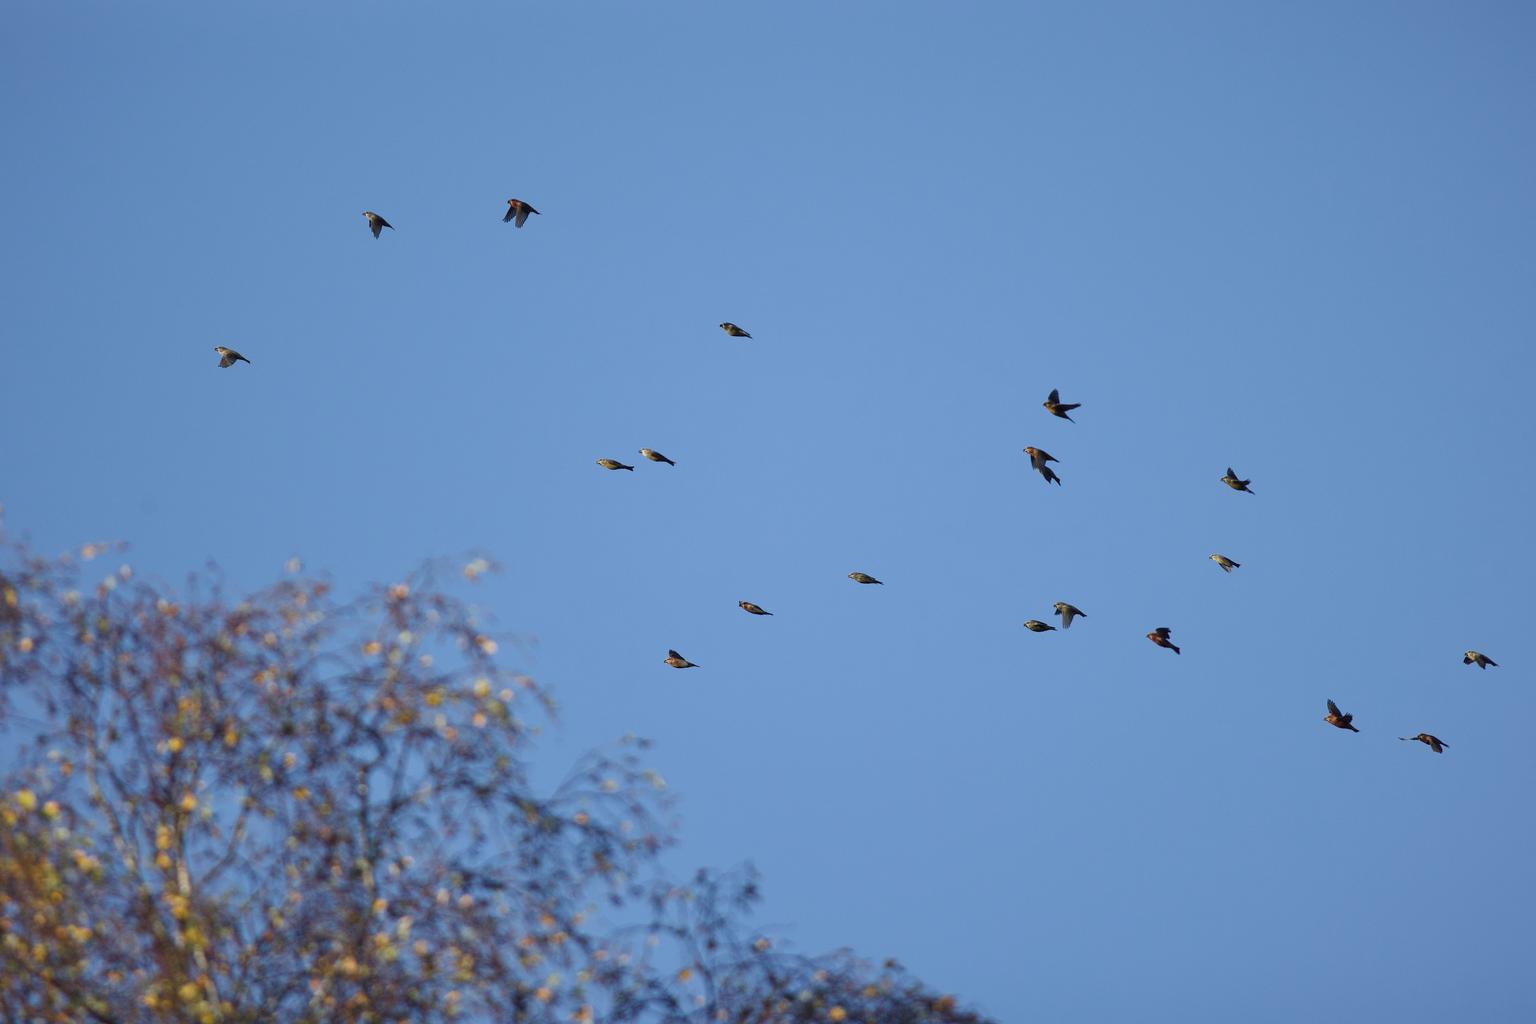 A whole flock of crossbills.